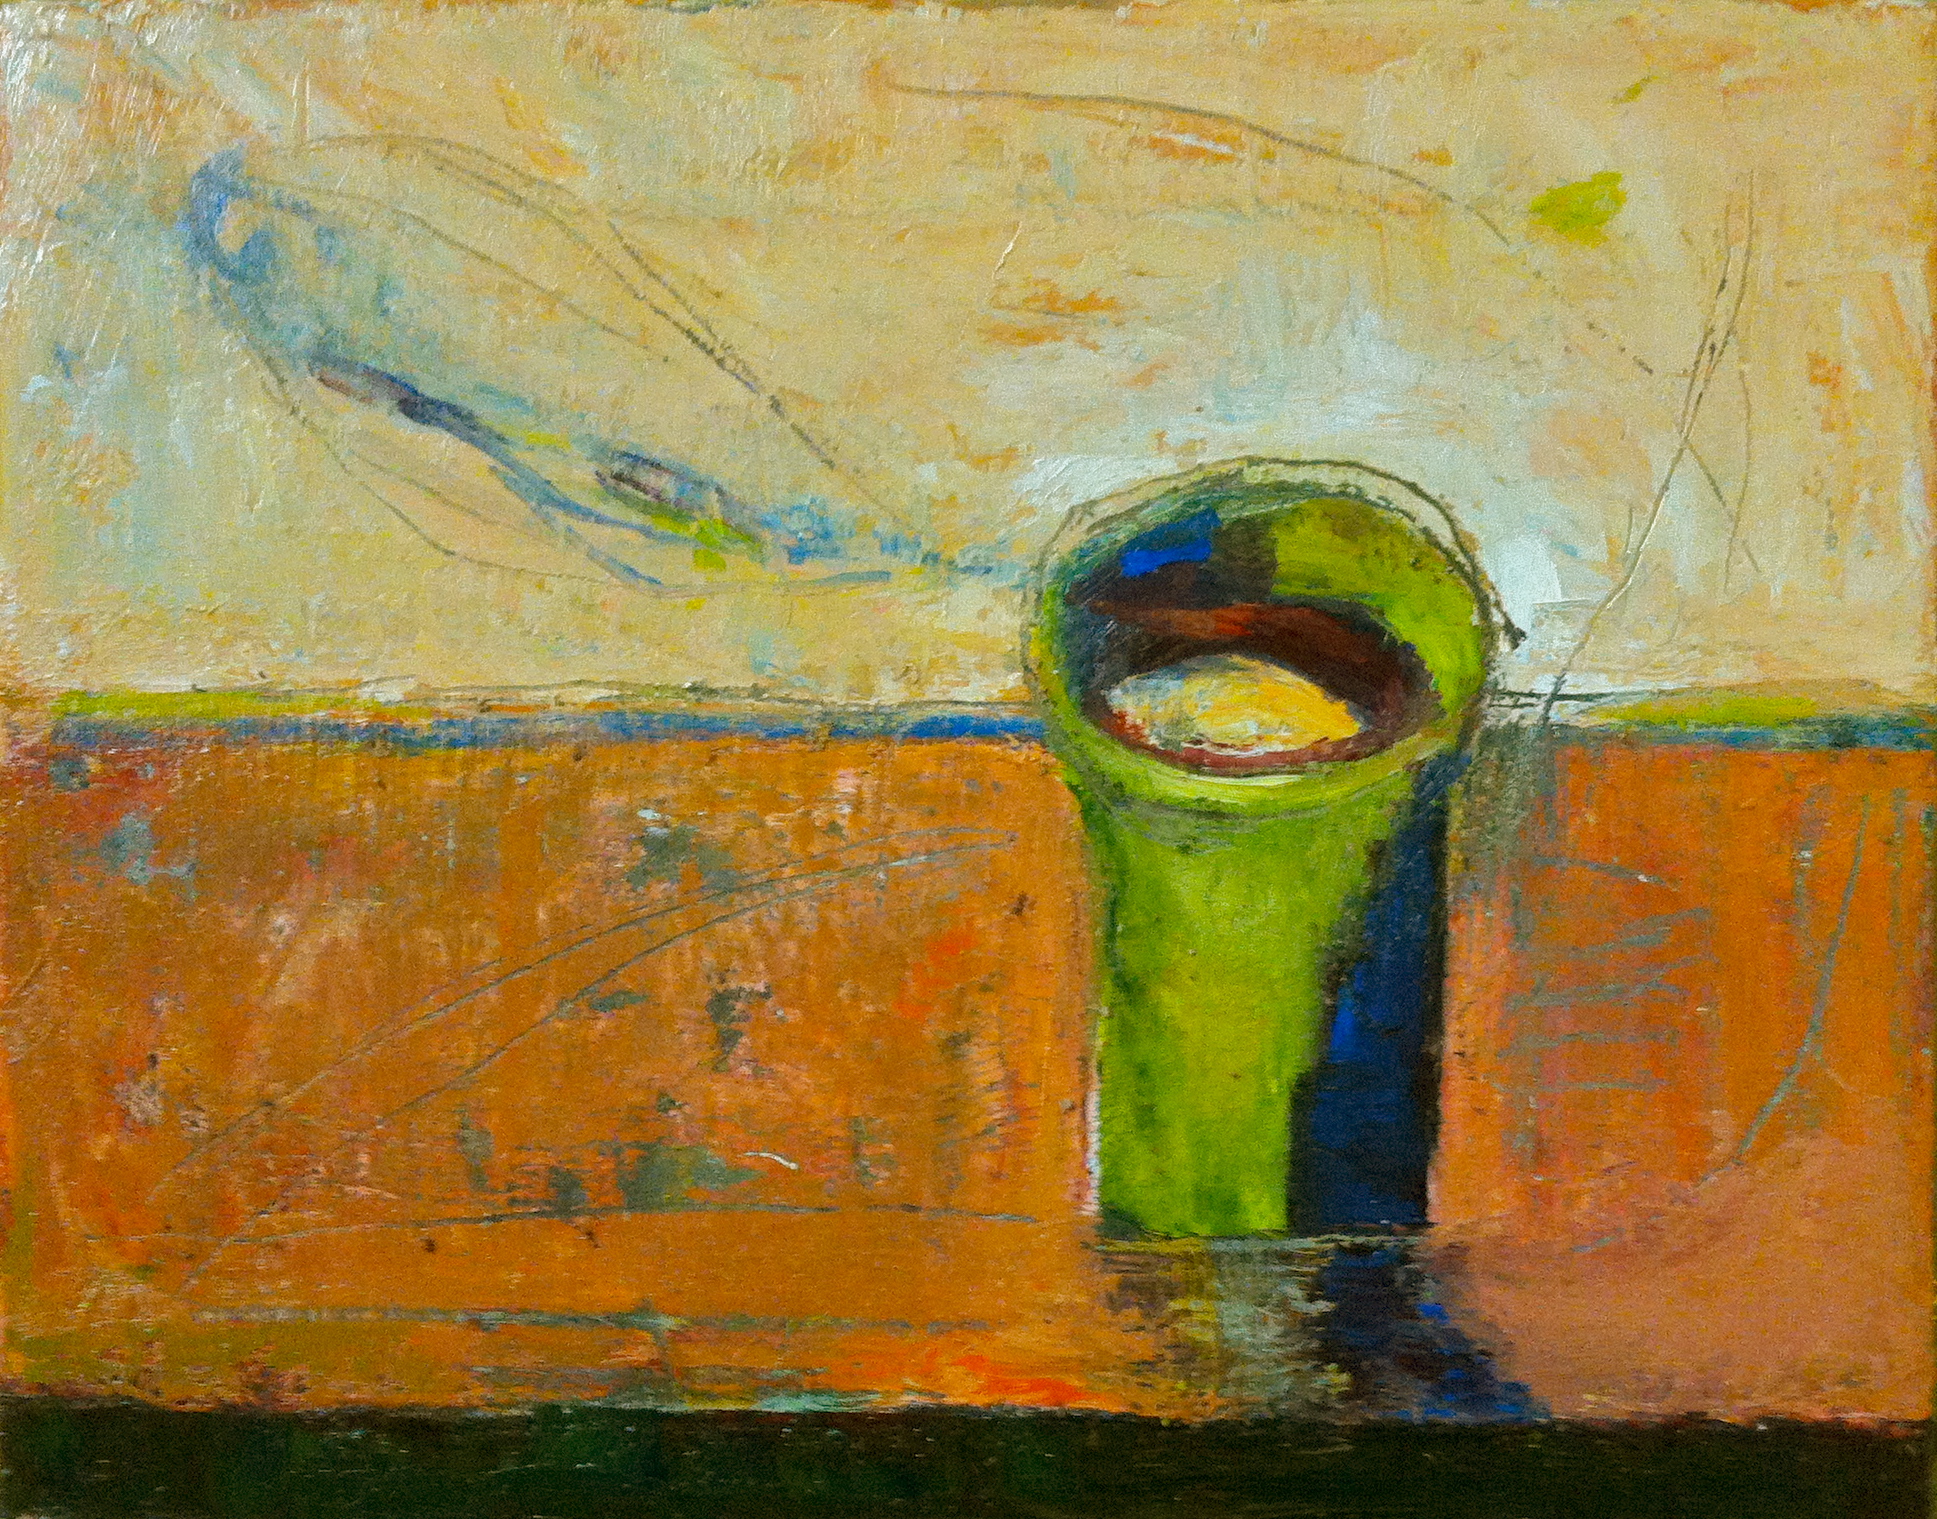  Green cup, oil on canvas, 12x11 inches, 2015 